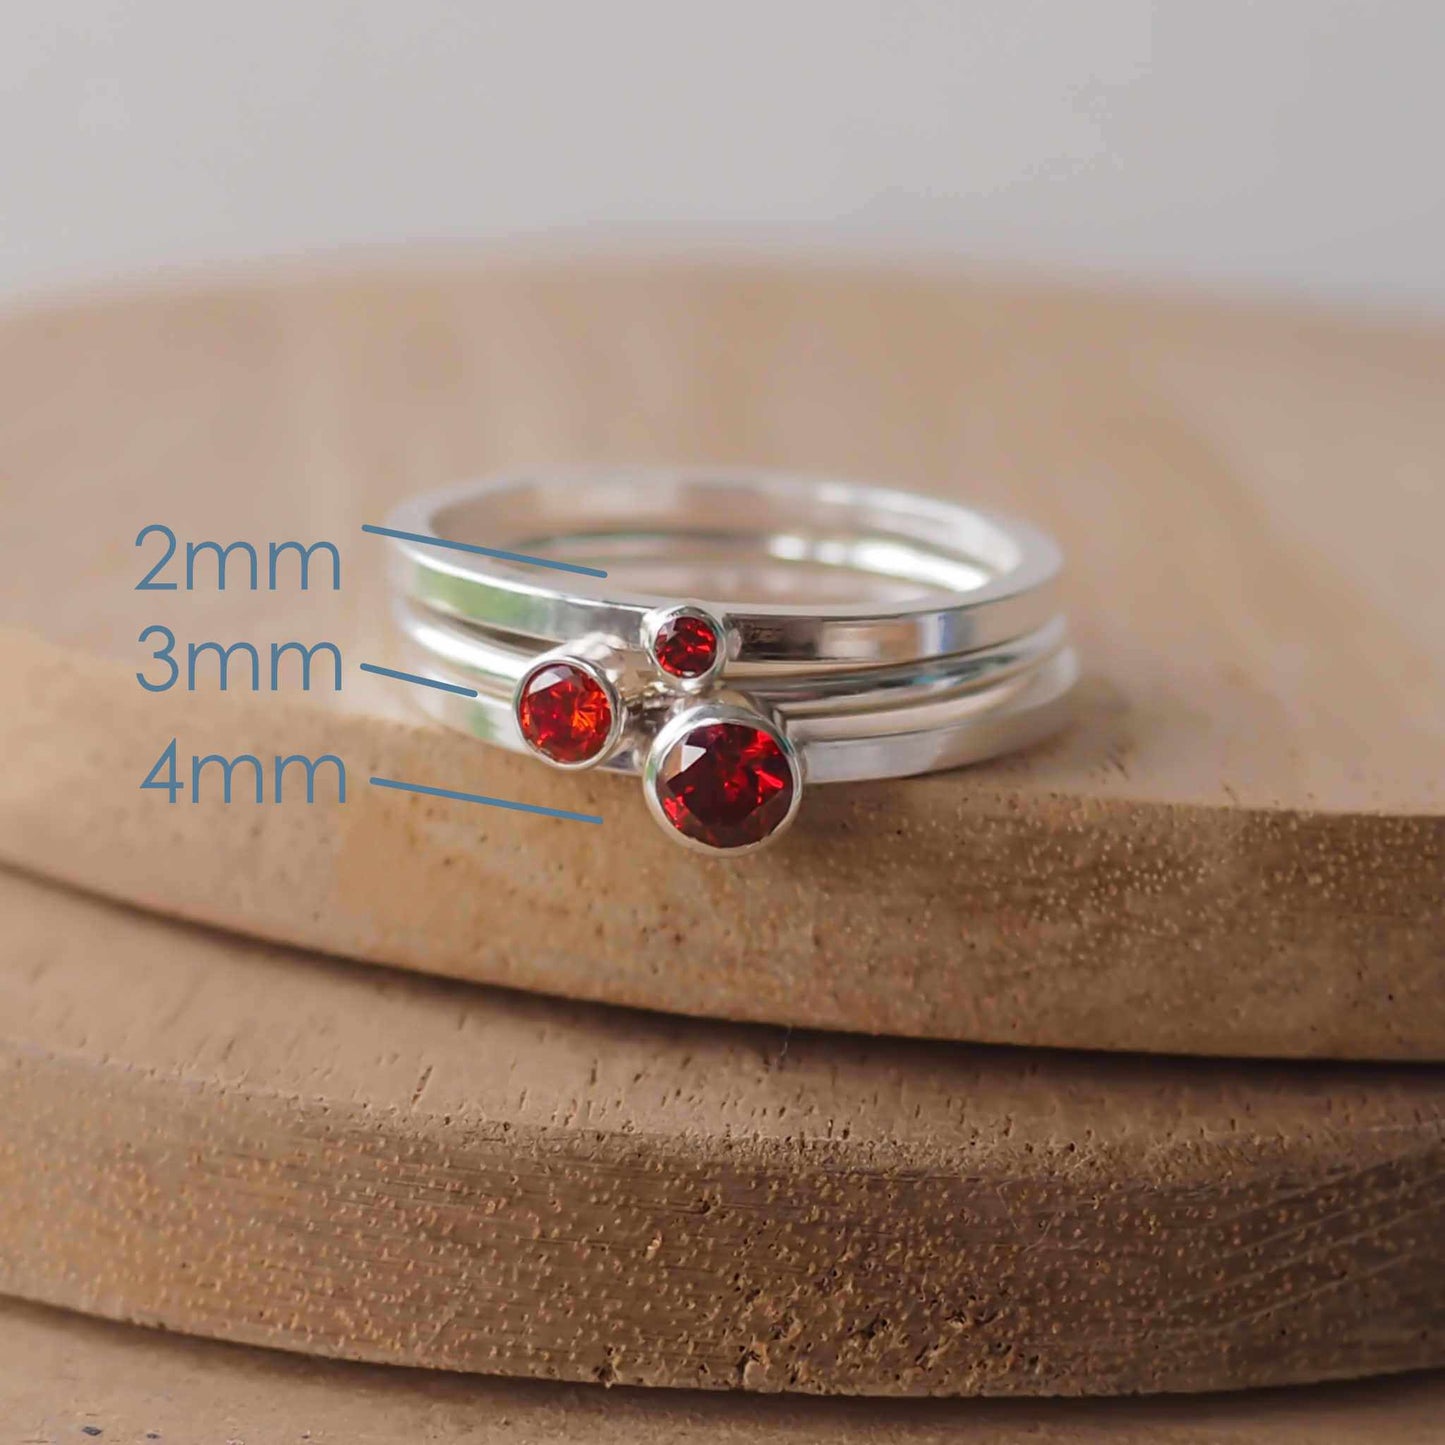 Three rings showing the square and round band styles with three different sized Cubic Zirconia in a deep red Garnet. The rings are made from Sterling Silver and a round red cubic zirconia measuring 2,3 or 4mm in size. Handmade by maram jewellery in Scotland